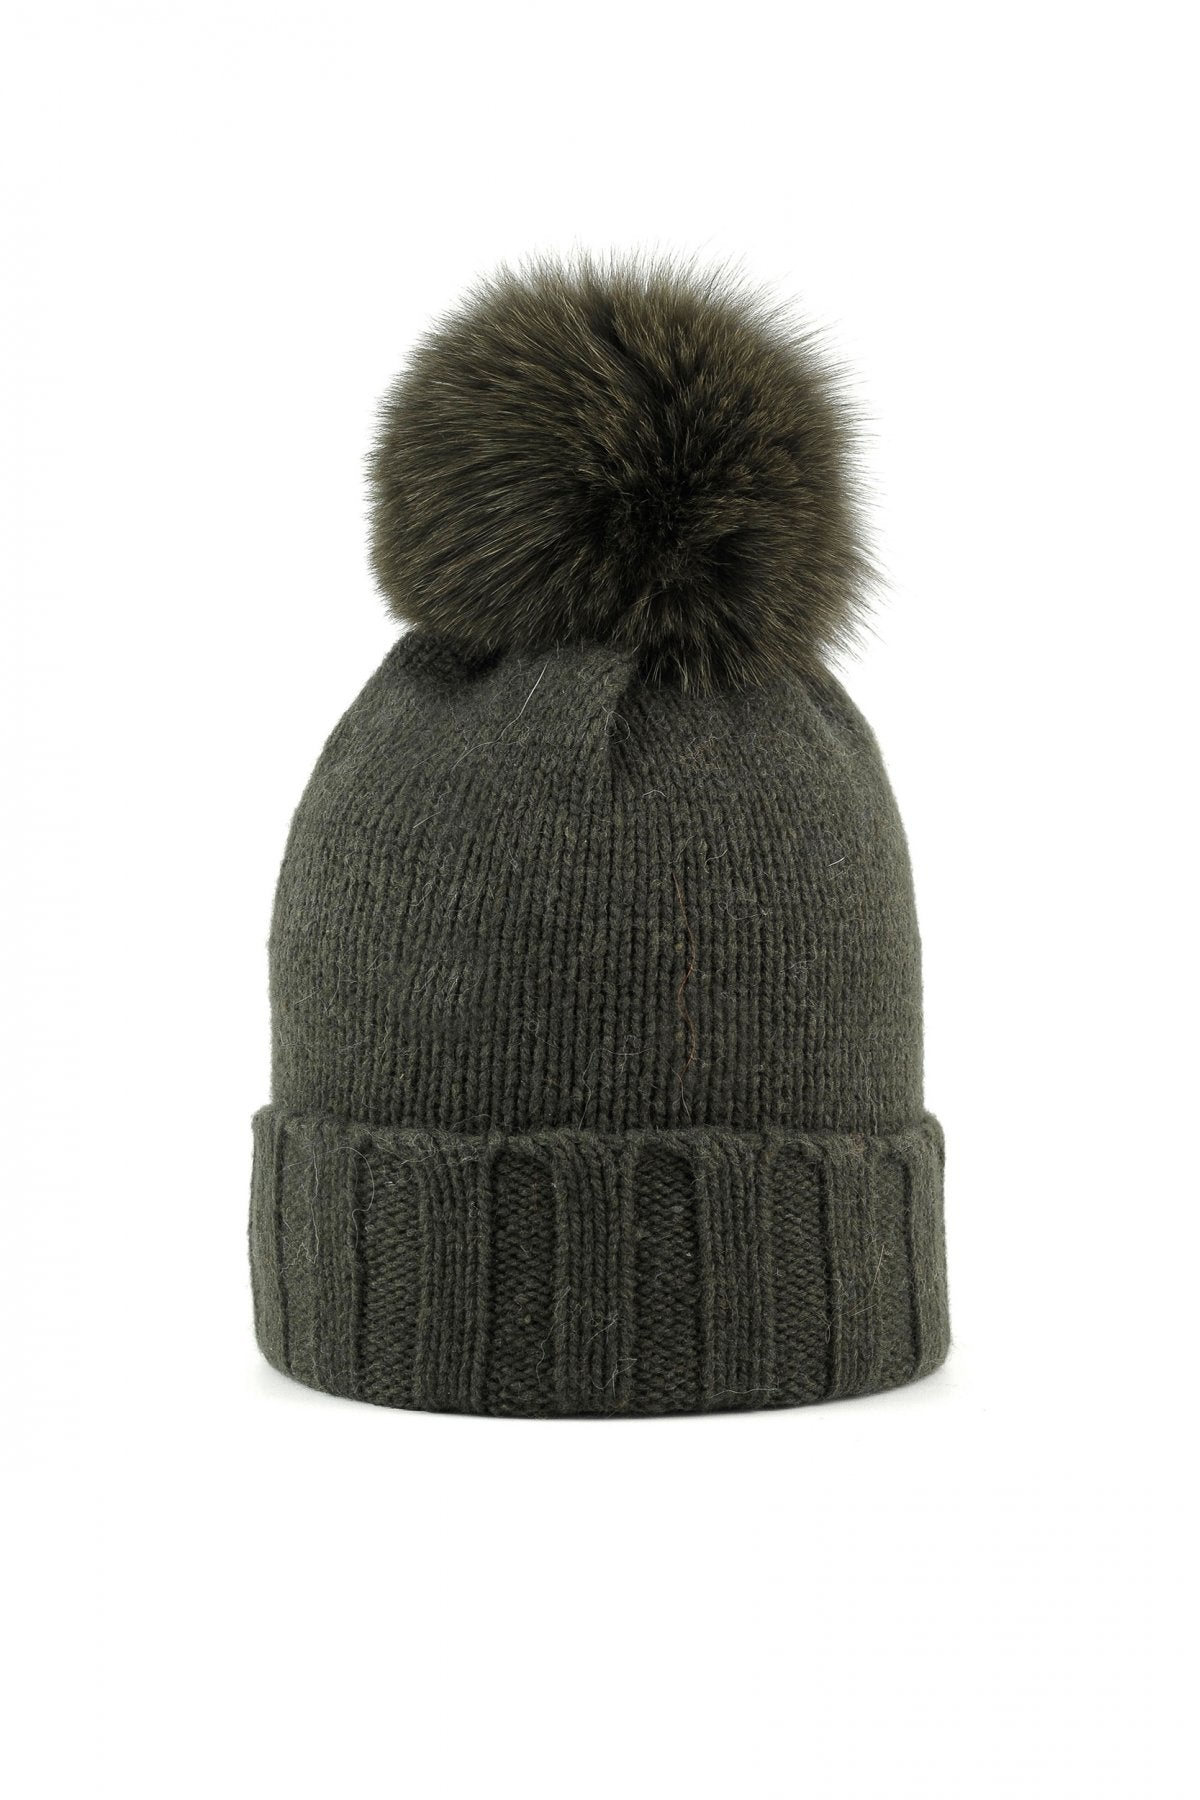 Canadian cappello donna hat with pom